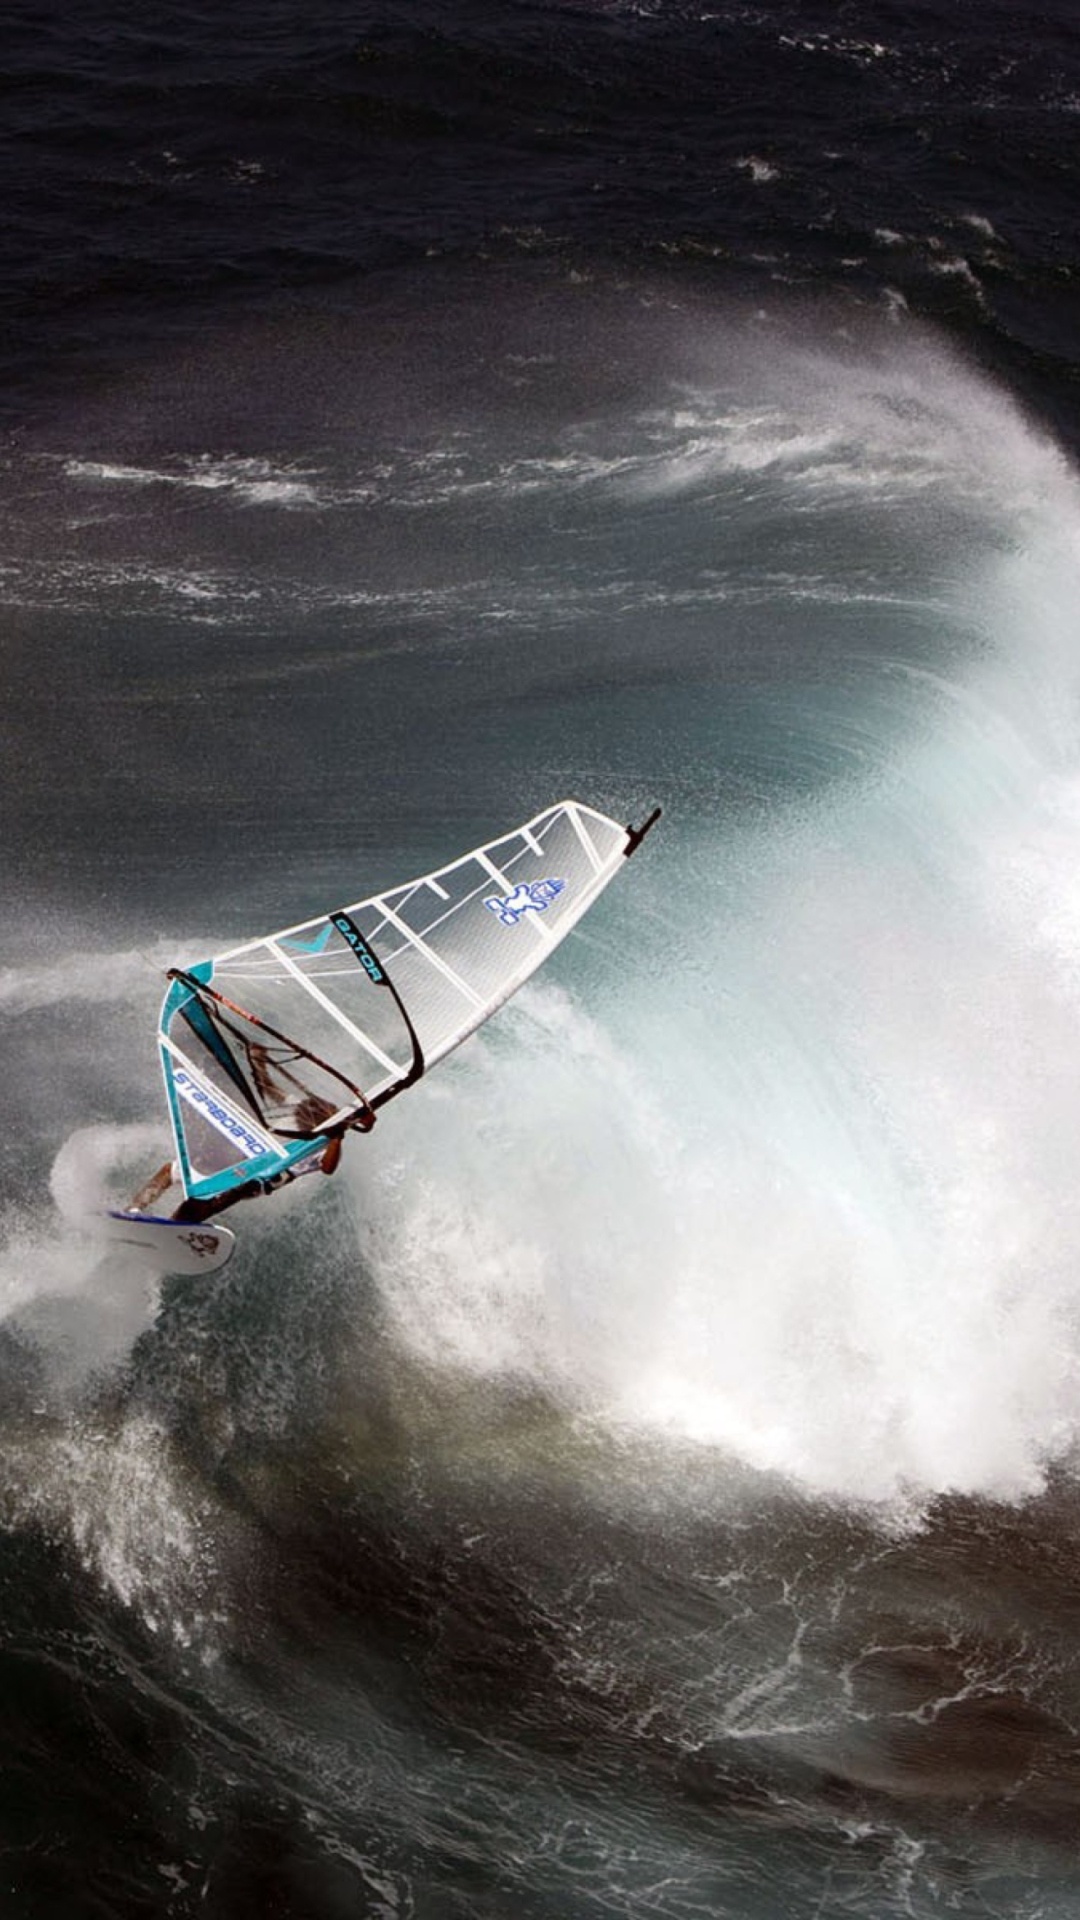 Windsurfing: Big Wave Windsurfing, The Most Extreme Water Sport To Try In Summer. 1080x1920 Full HD Background.